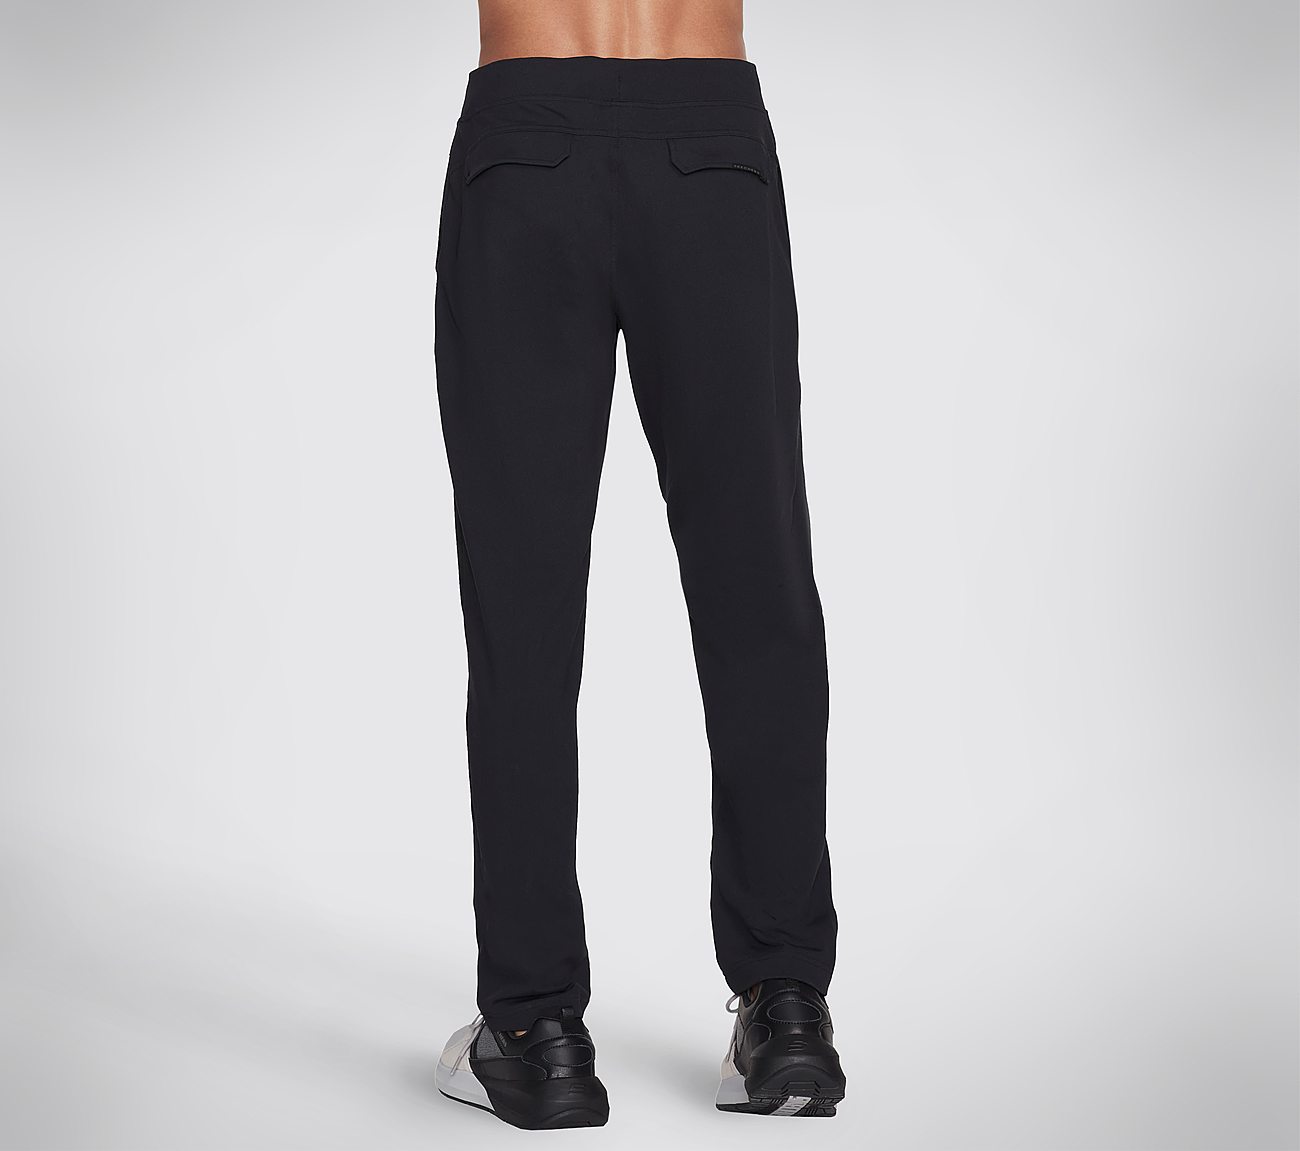 THE GOWALK PANT RECHARGE, BBBBLACK Apparel Top View